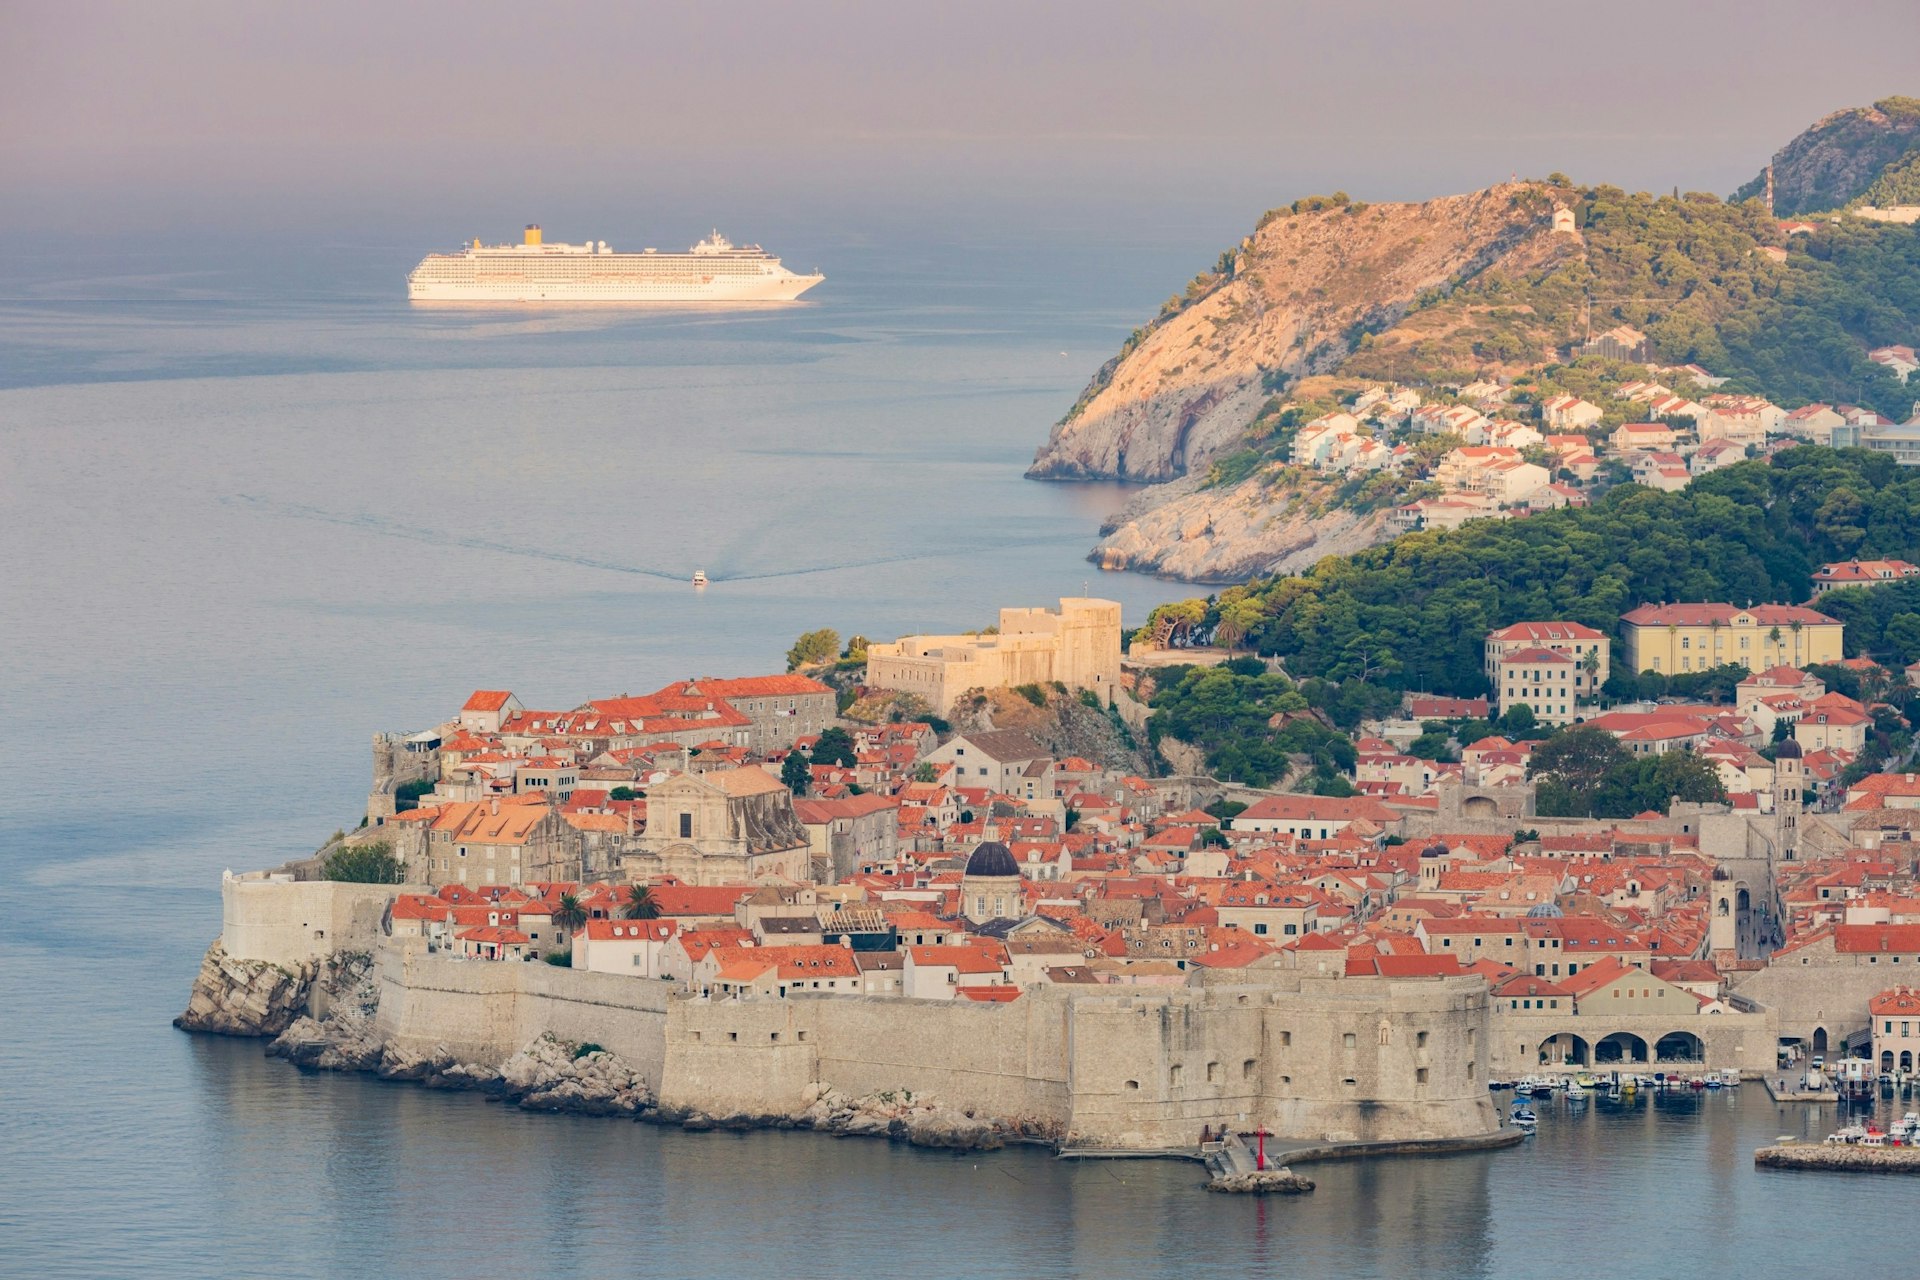 A cruise ship passing behind the waterfront of Dubrovnik